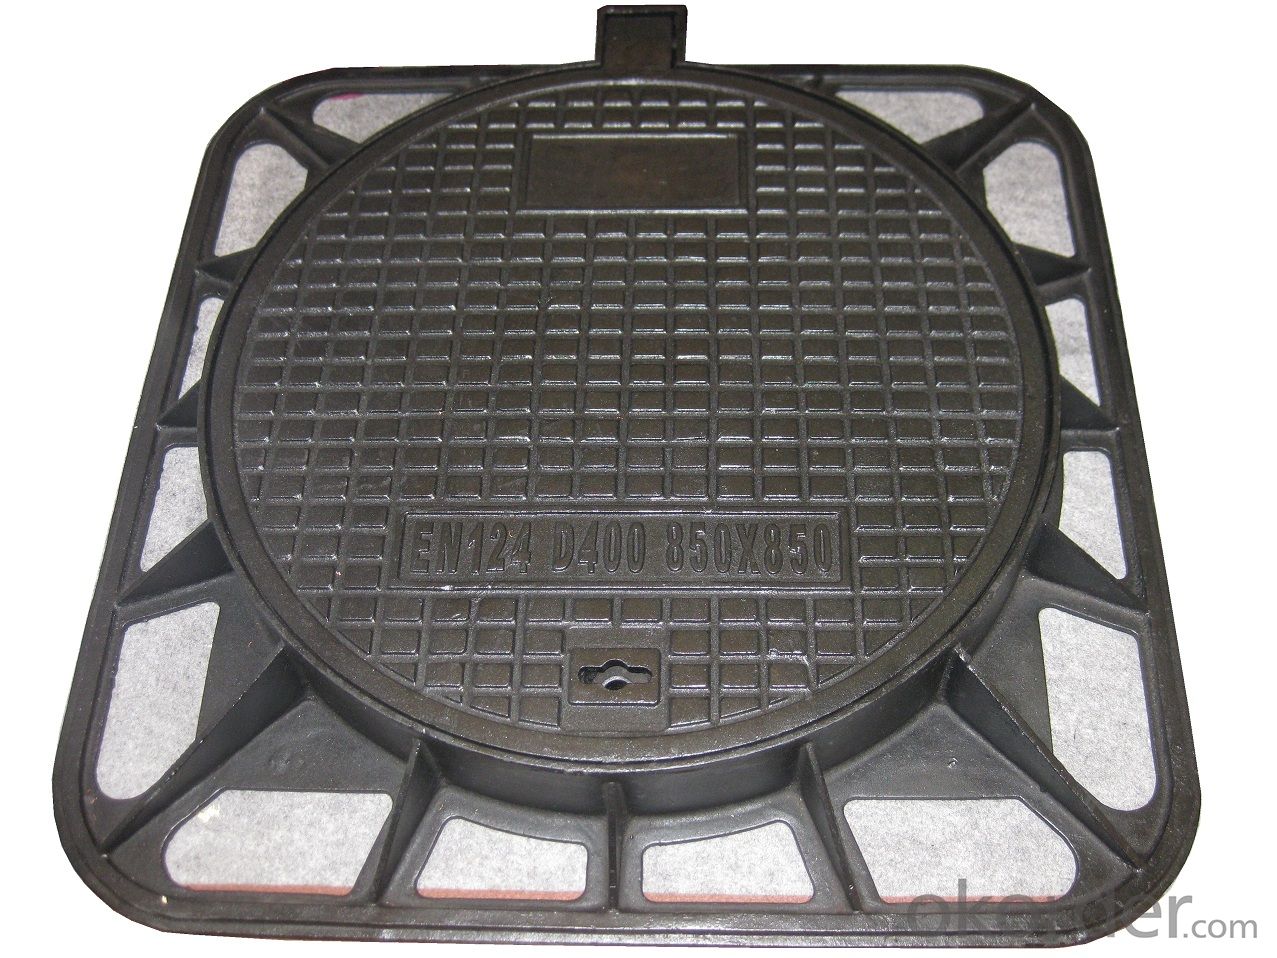 Manhole Cover EV124/480 Made in China with Price